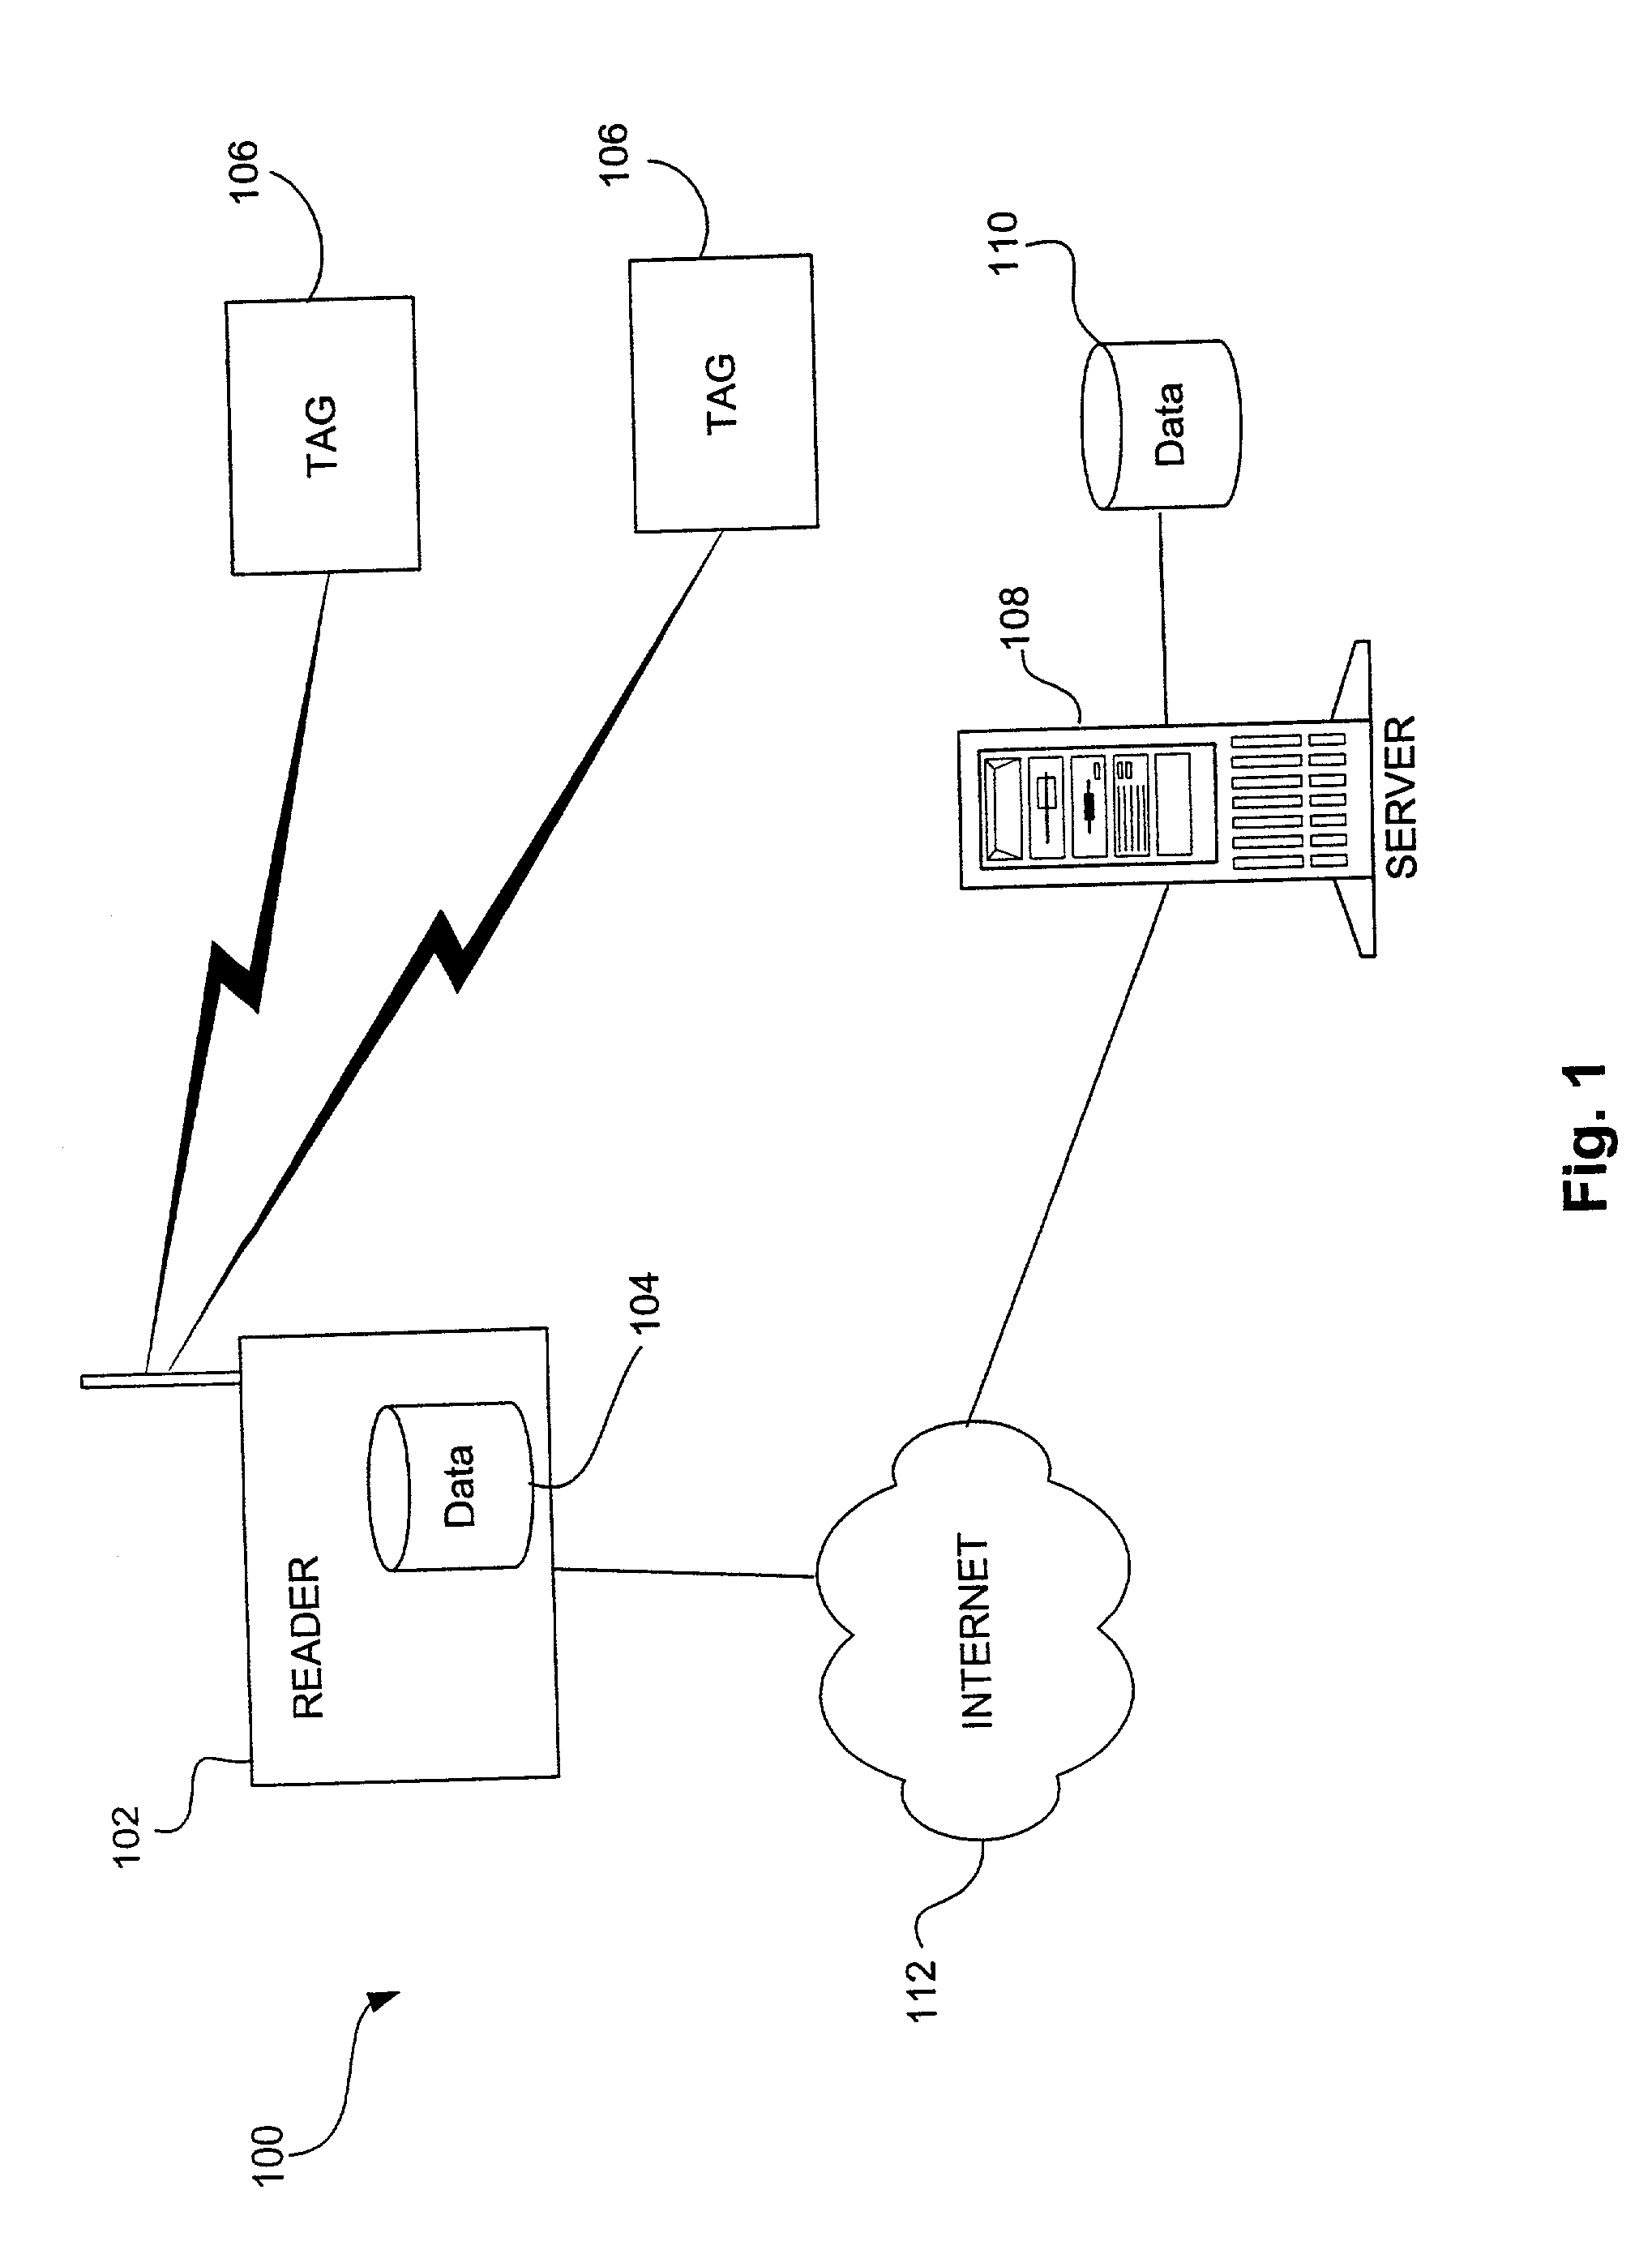 System and method for compressed tag codes and code mapping